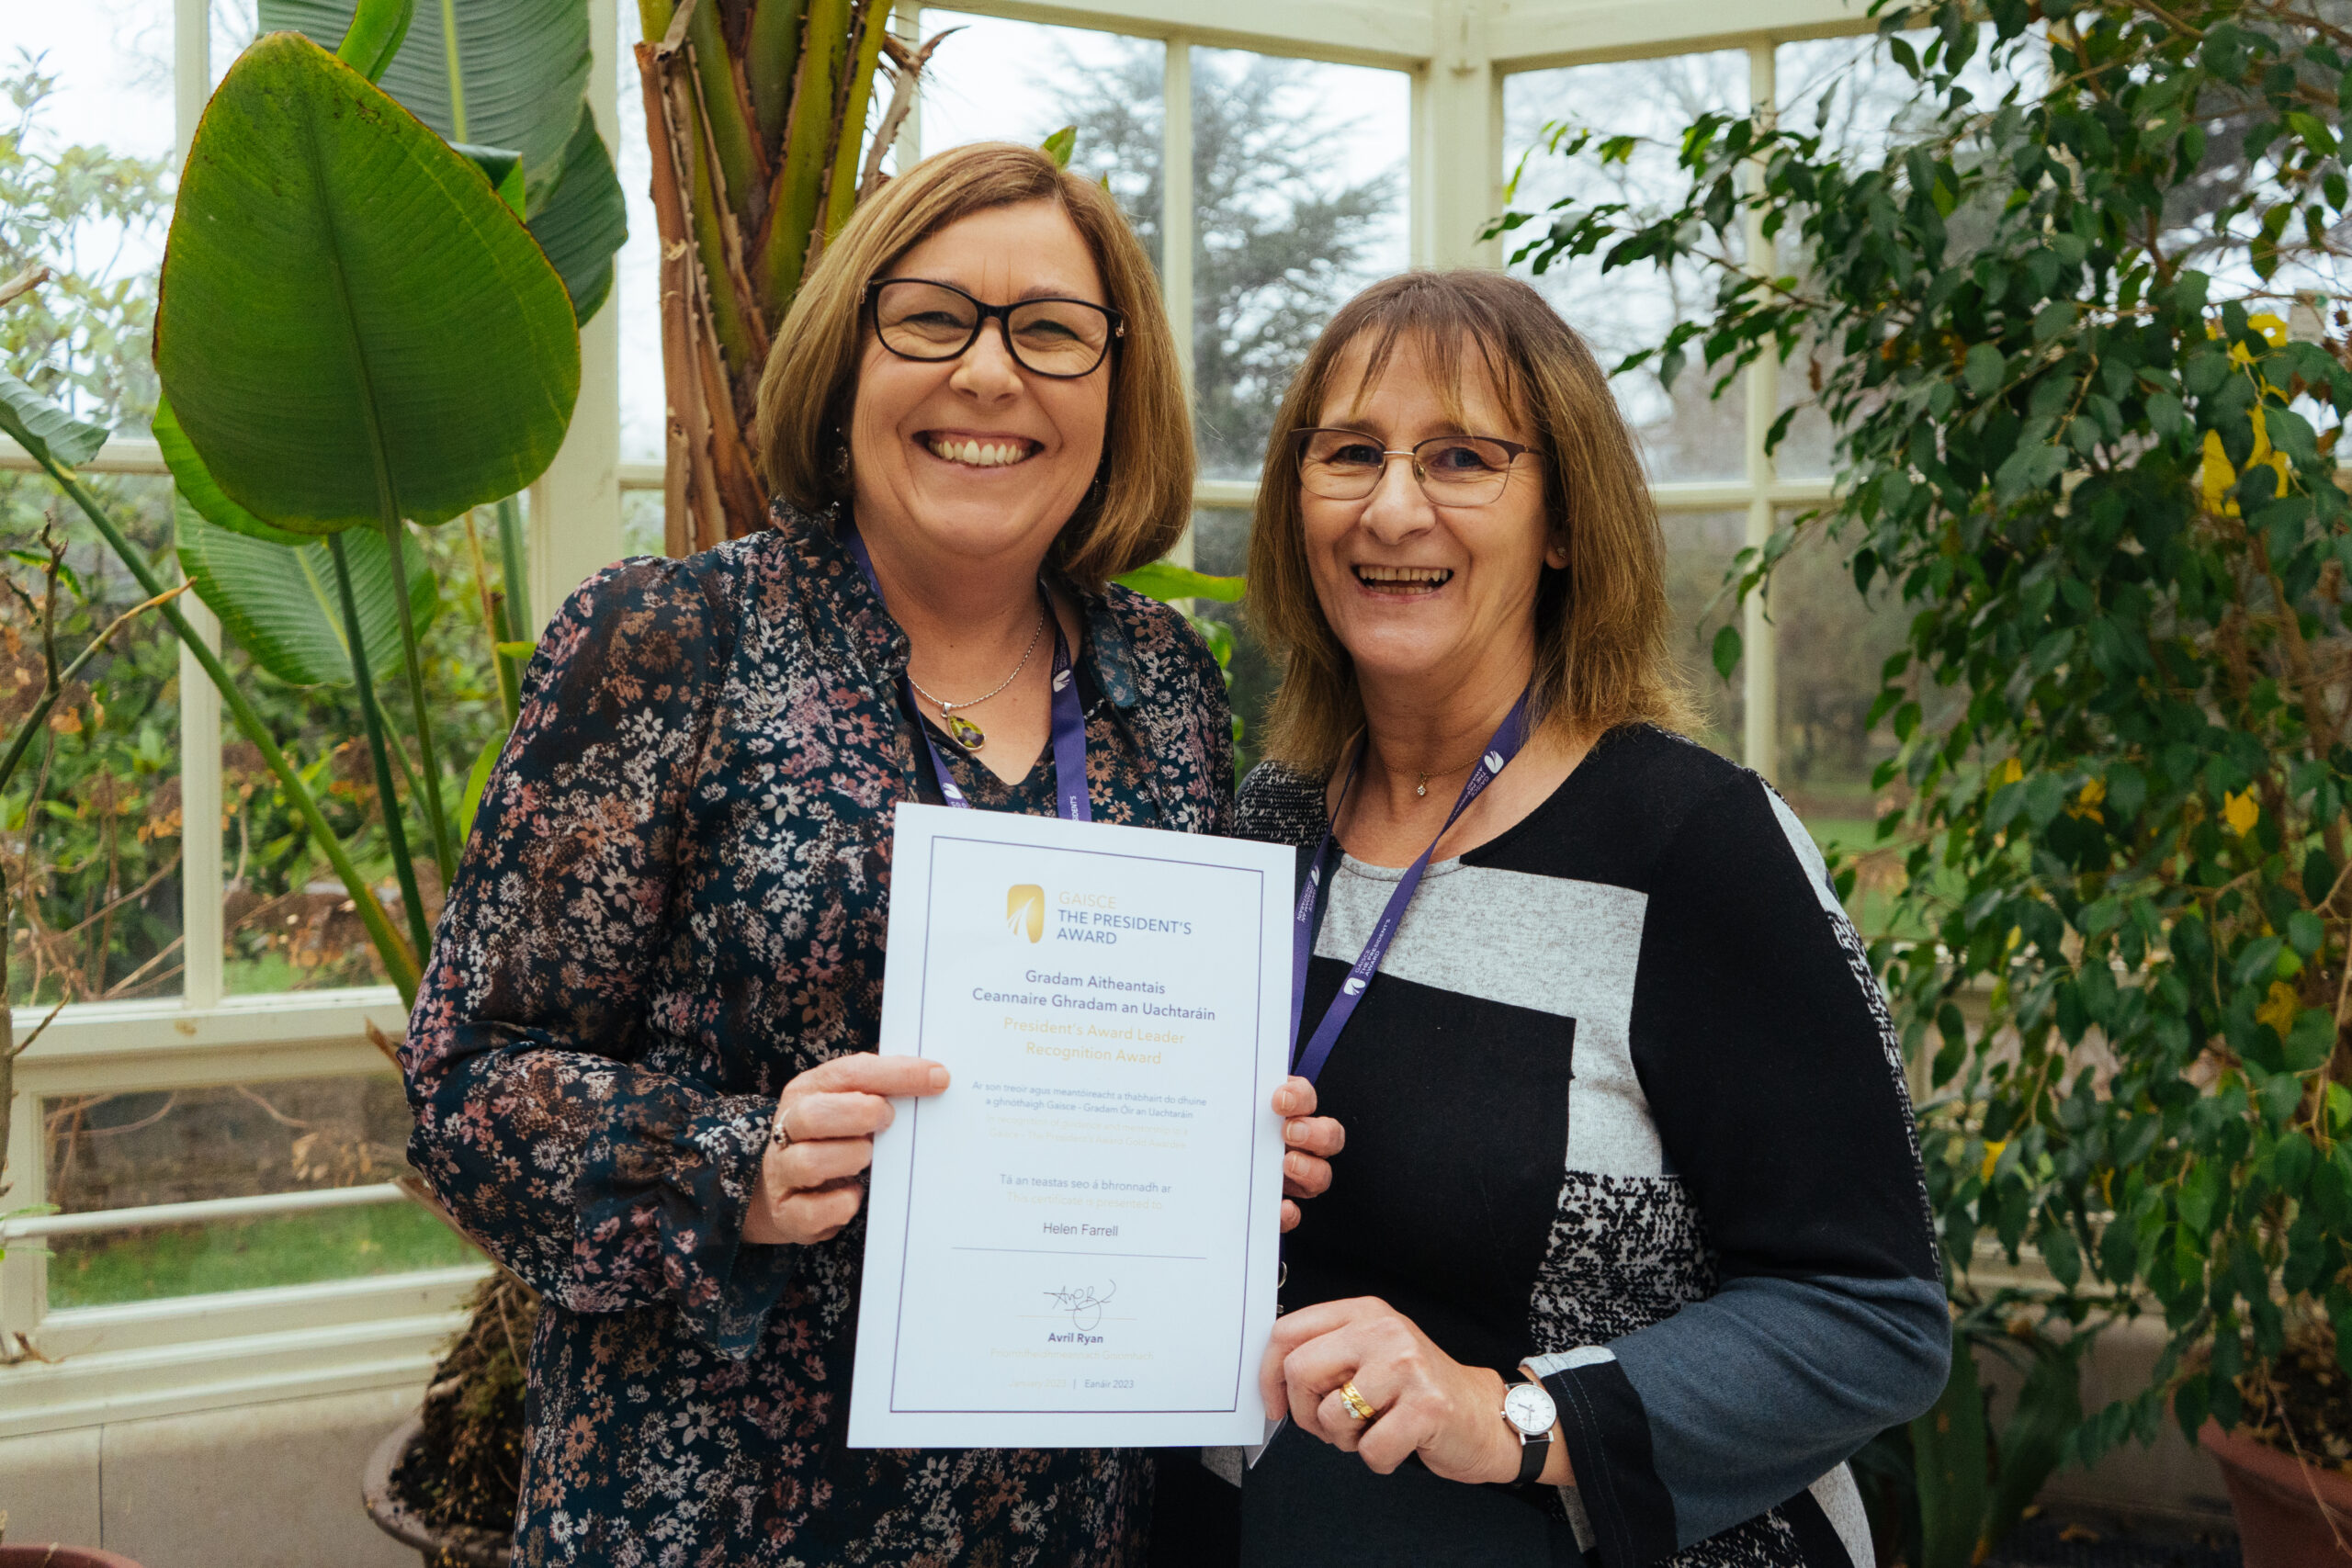 Helen Farrell posed with a colleague at the PAL Celebration Award Ceremony. She is holding her certificate proudly.